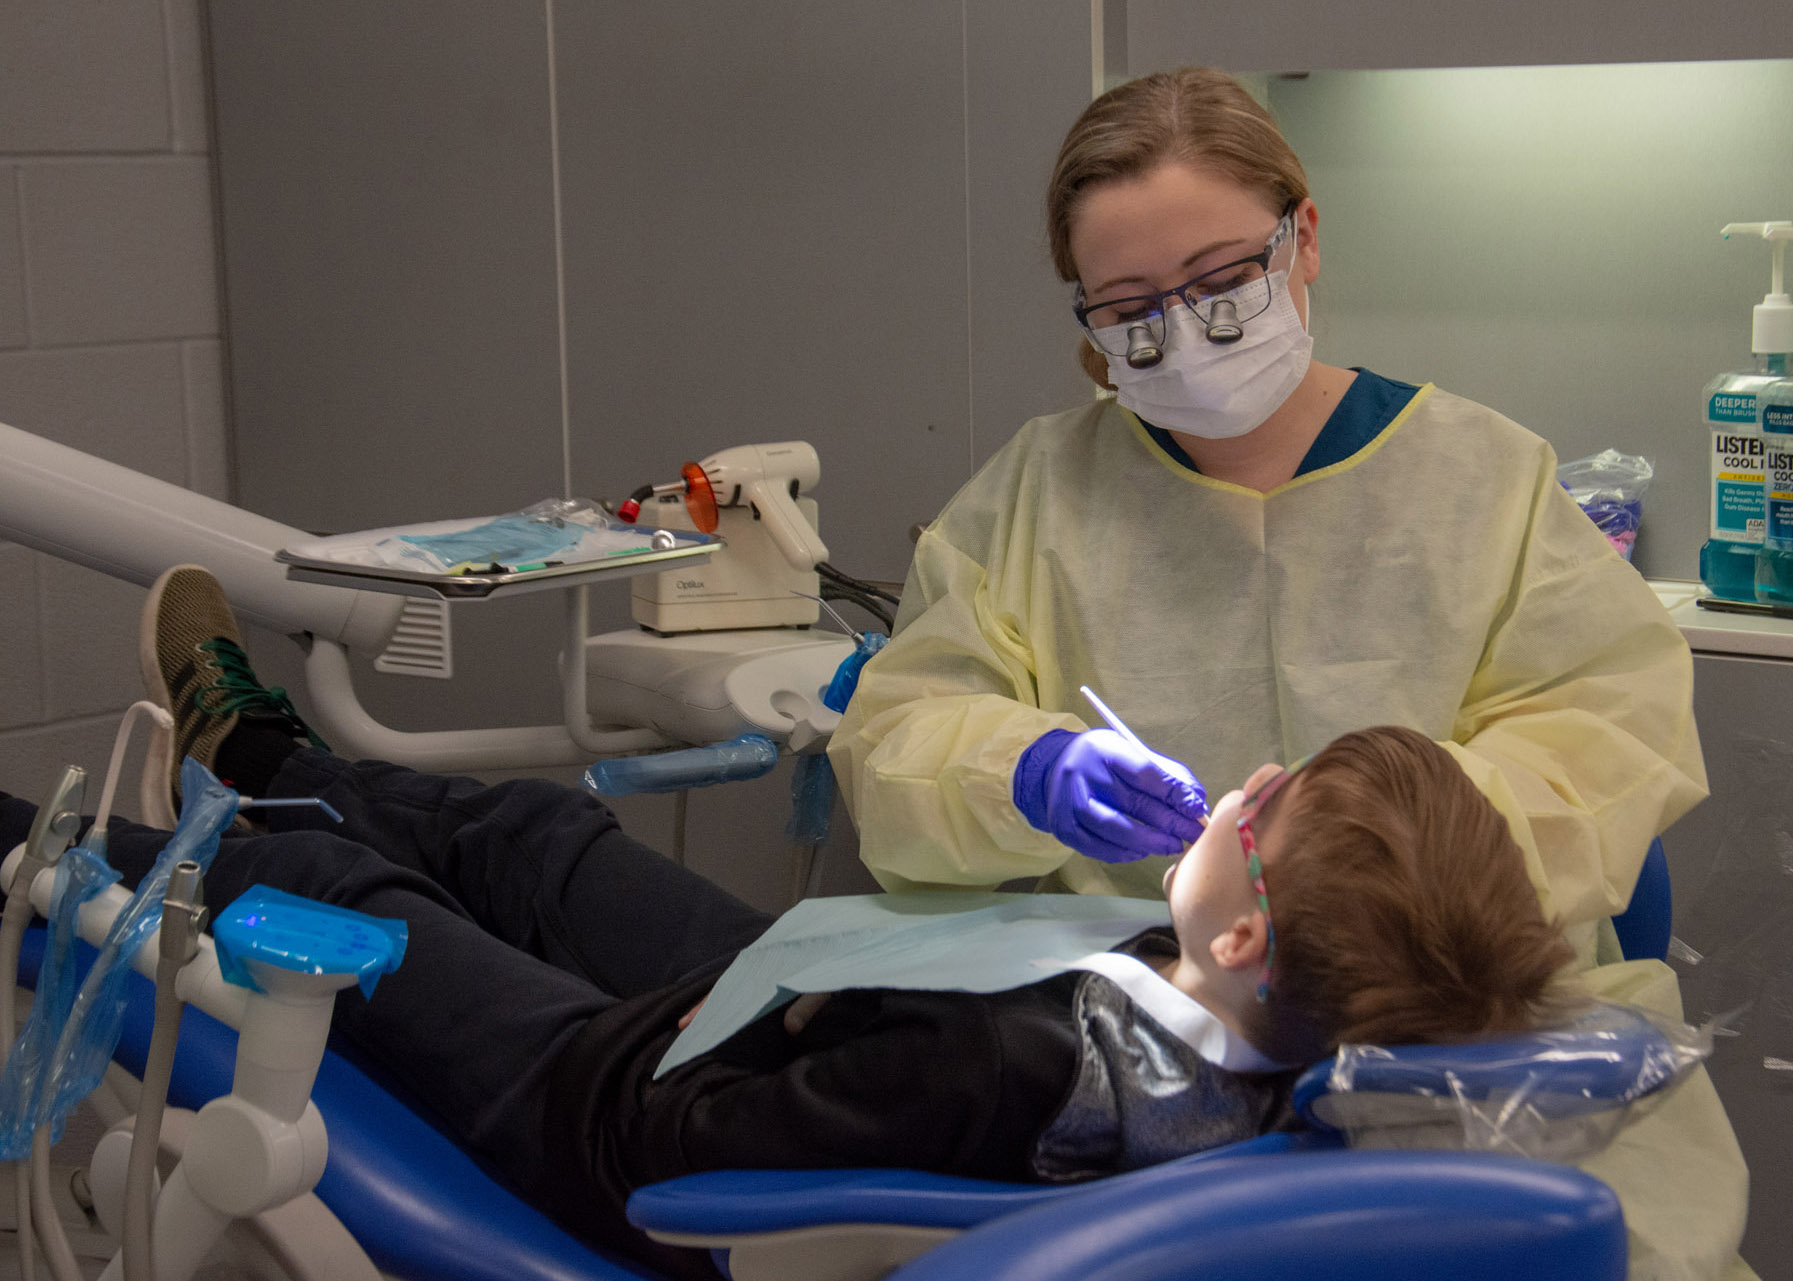 Student working in the Dental Hygiene Lab